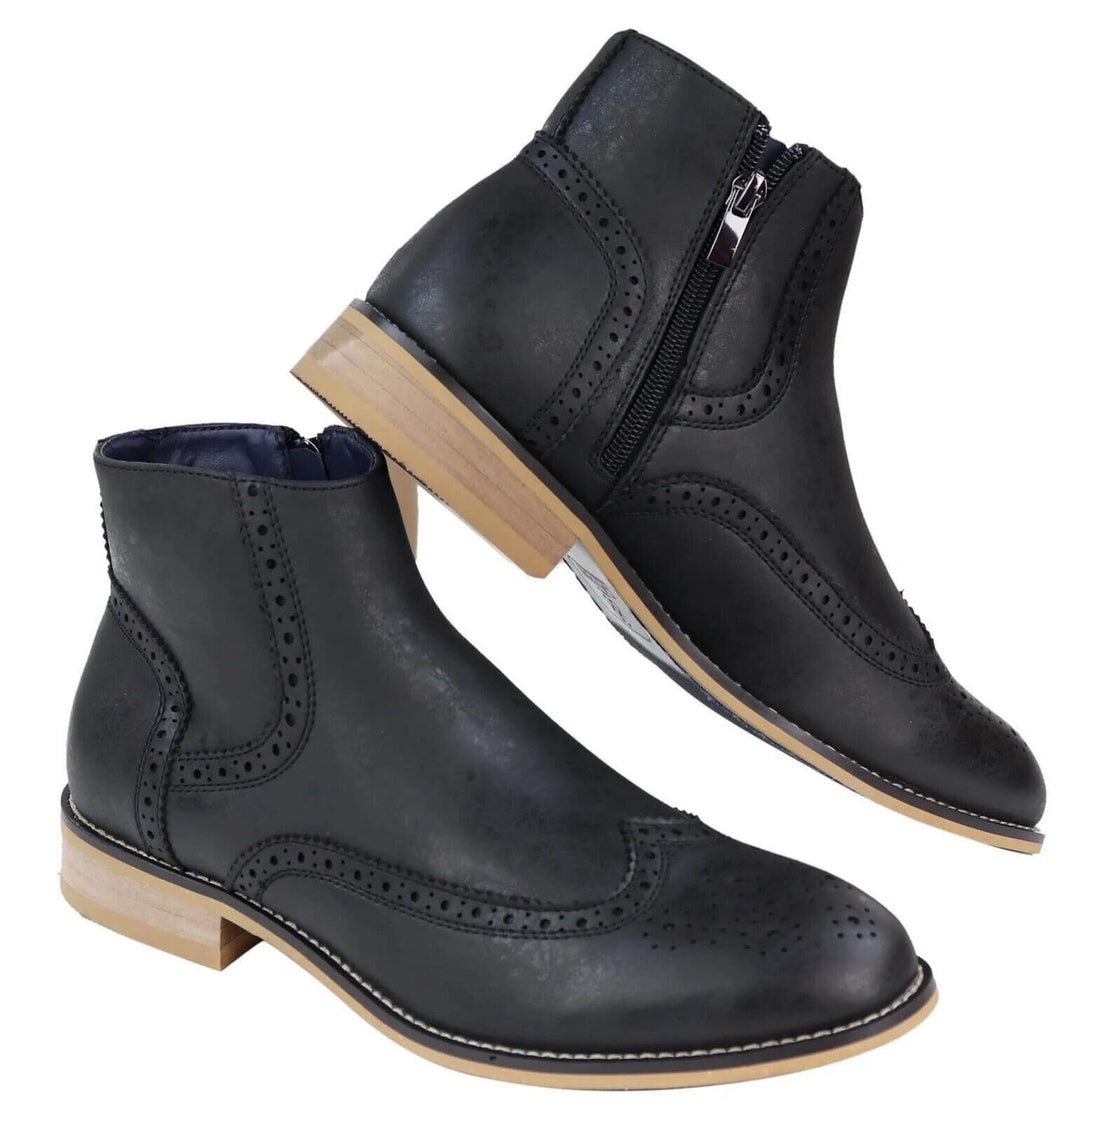 Mens Black Leather Brogue Zip Up Chelsea Boots